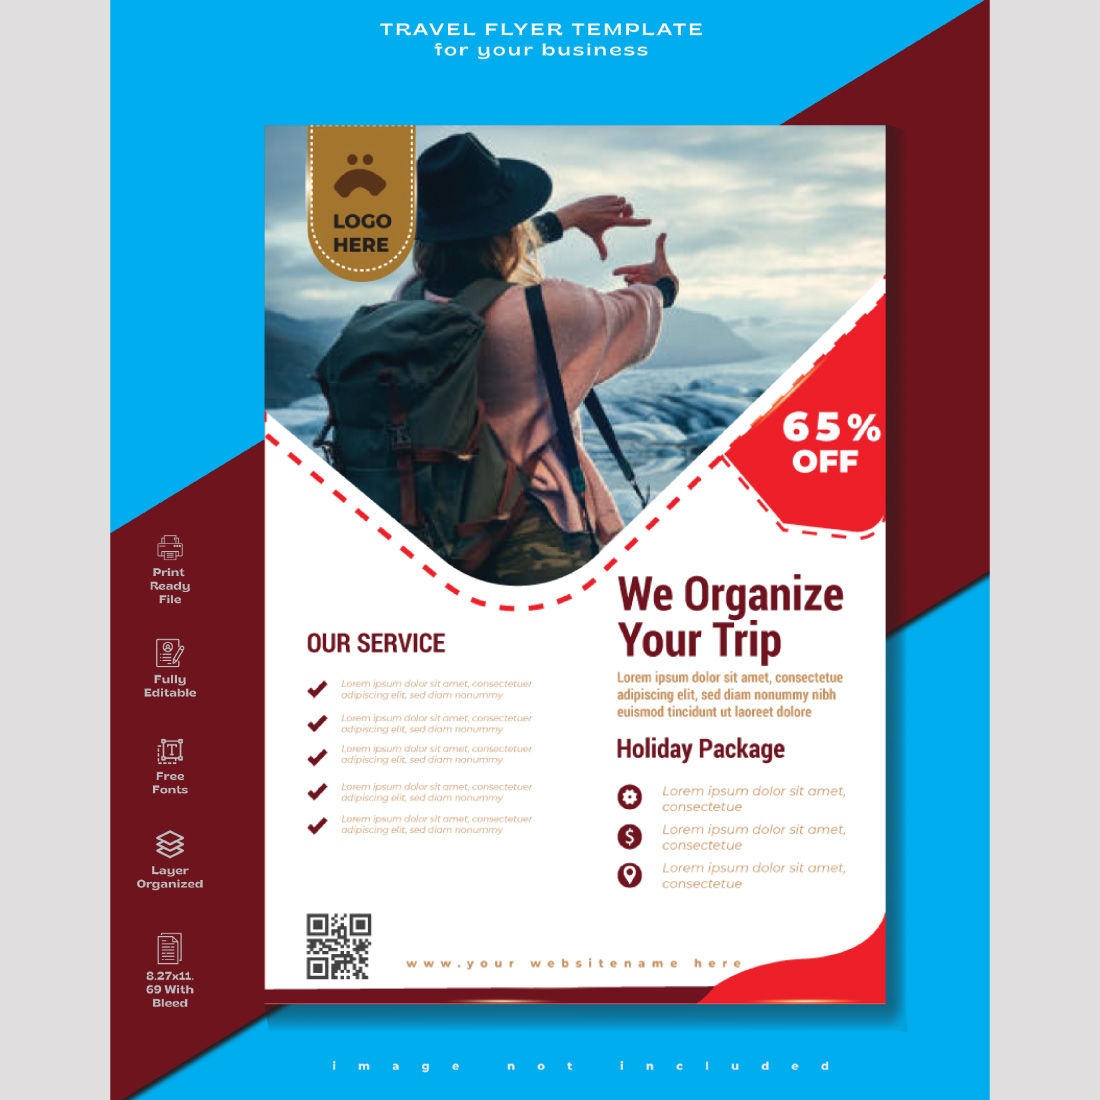 Travel flyer templatetravel tour flyer template for your business travel flyer design cover image.